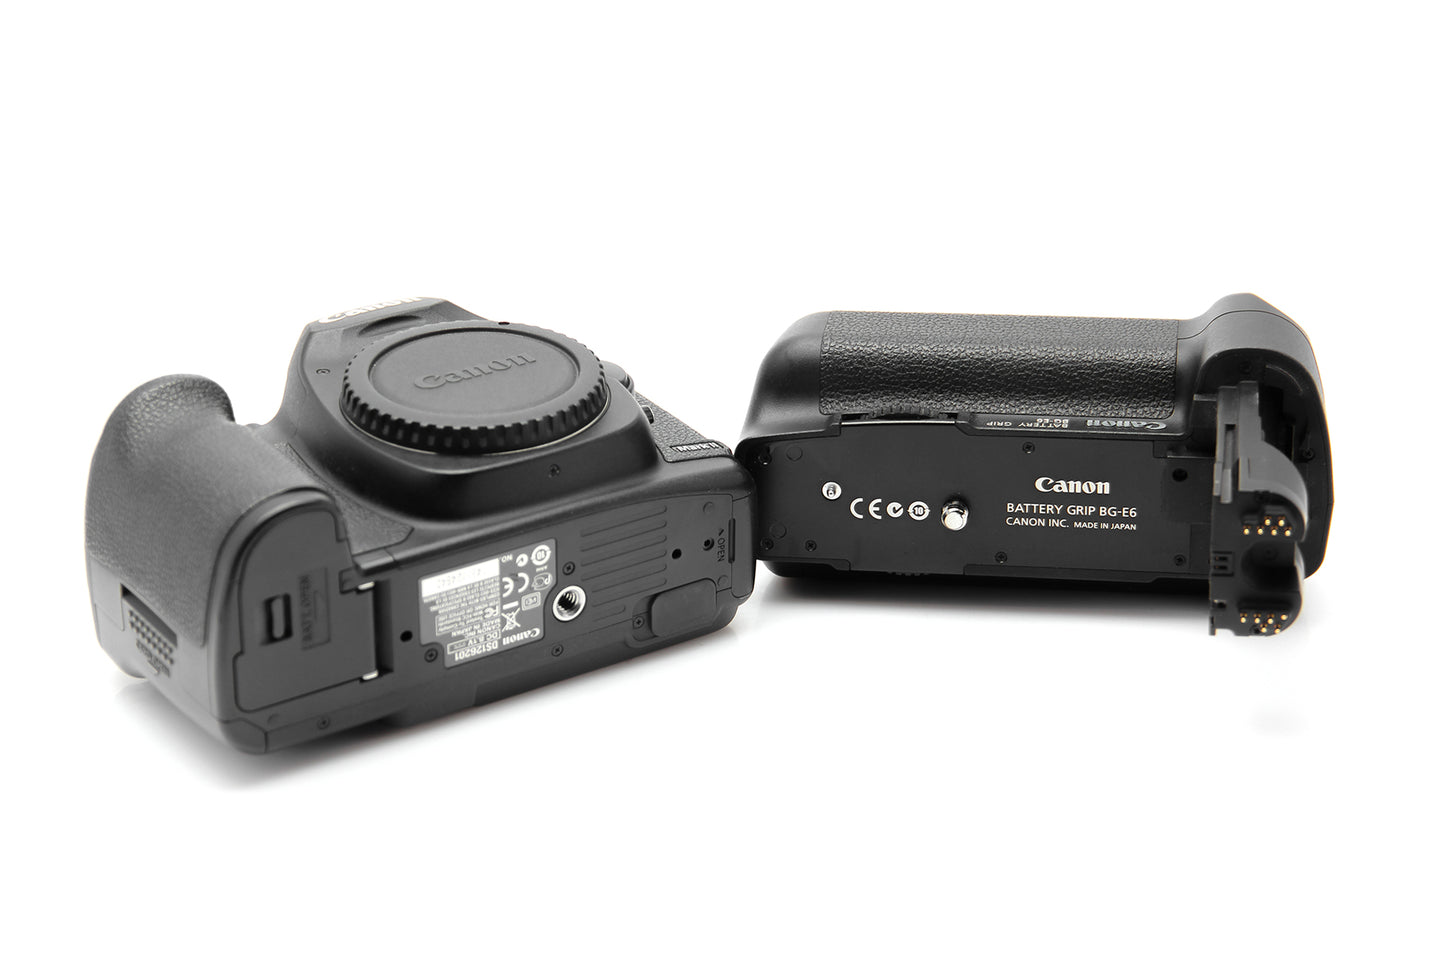 Used Canon EOS 5D Mark II Camera With Battery Grip